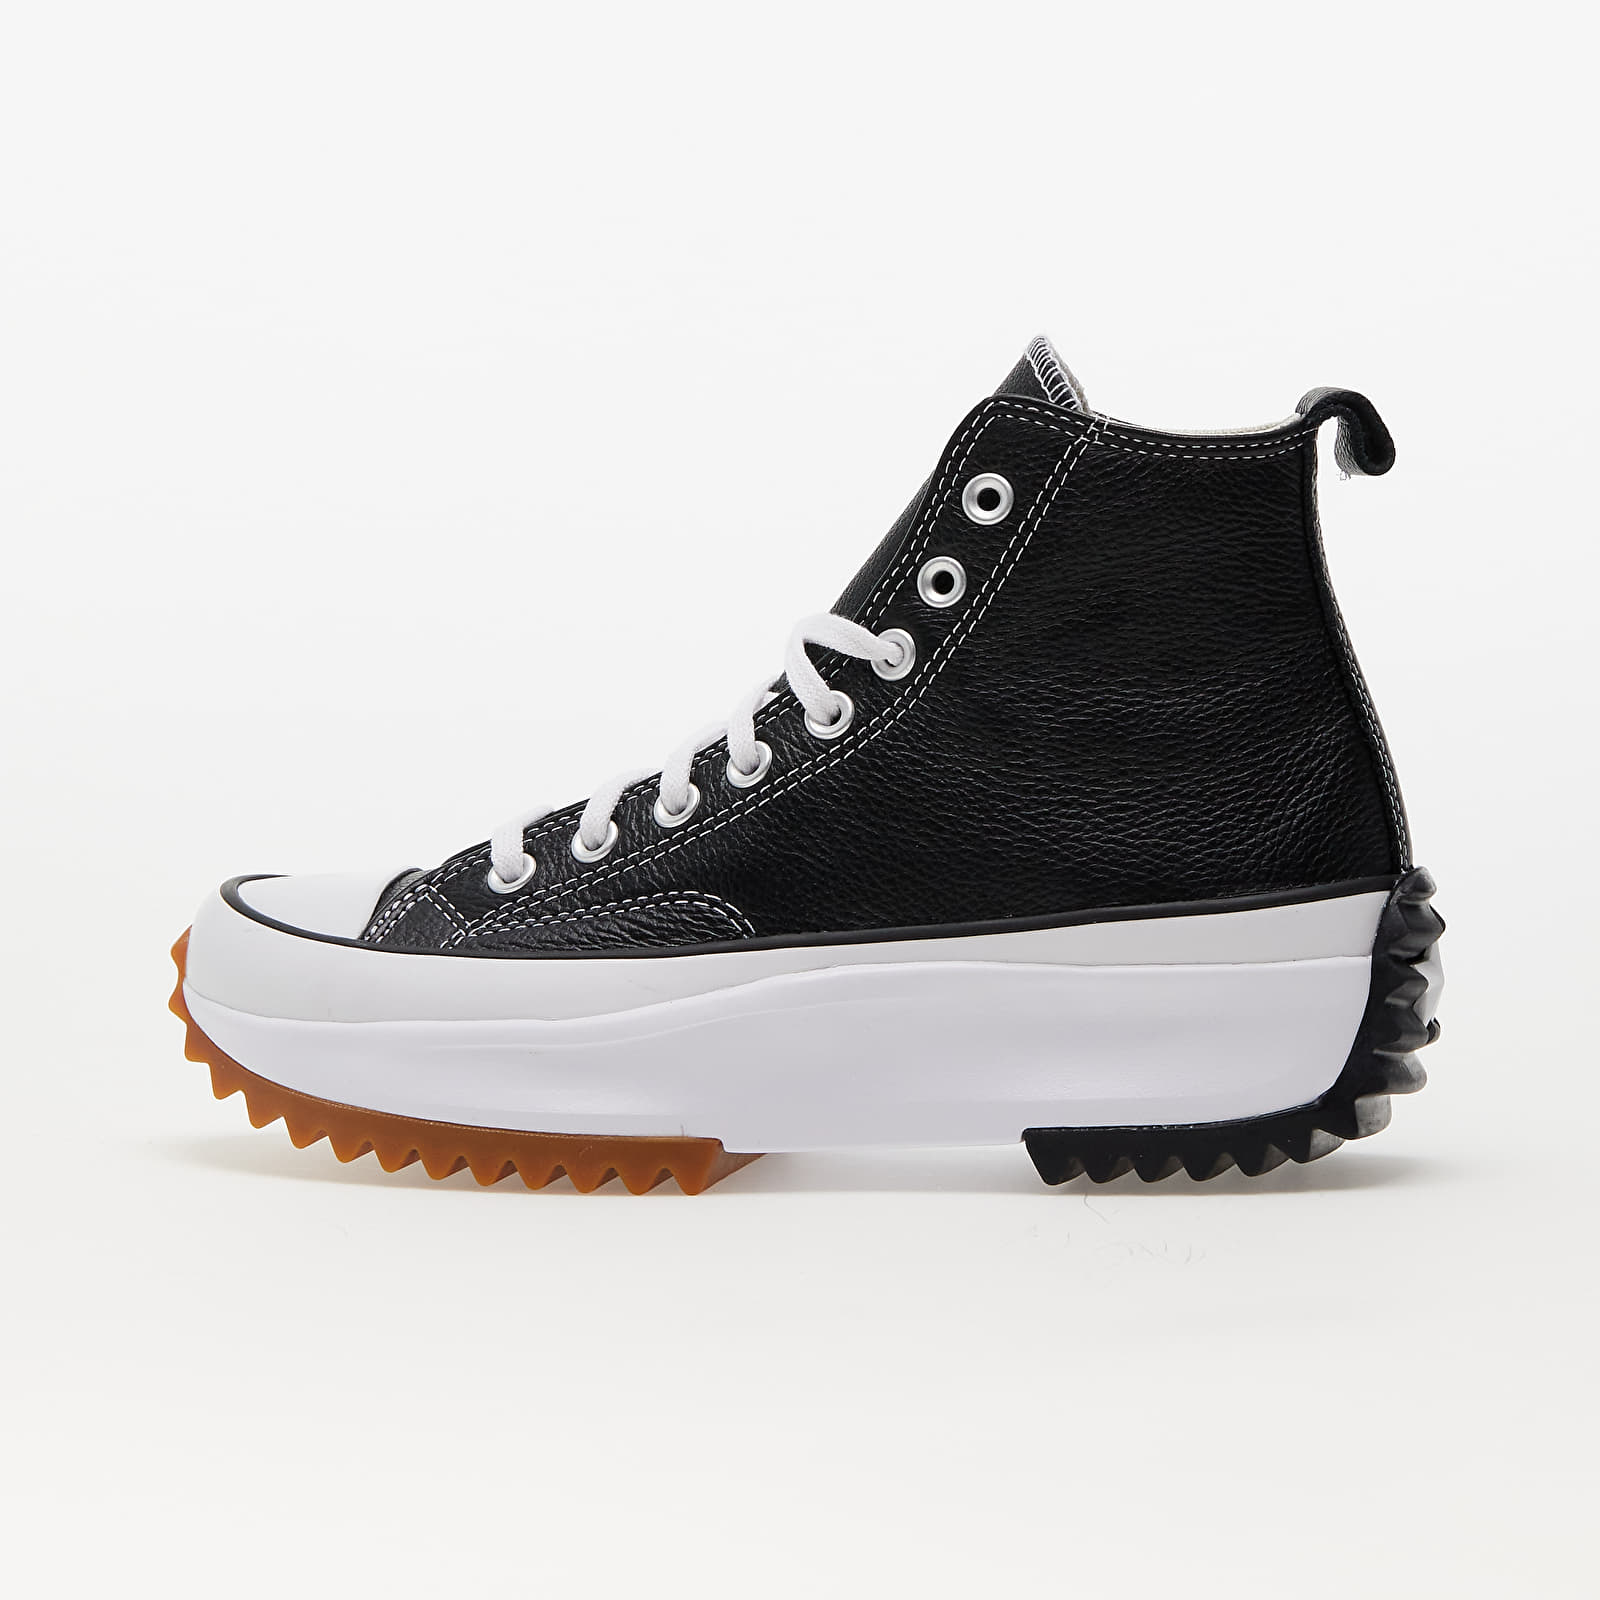 Chaussures et baskets homme Converse Run Star Hike Leather Black/ White/ Gum